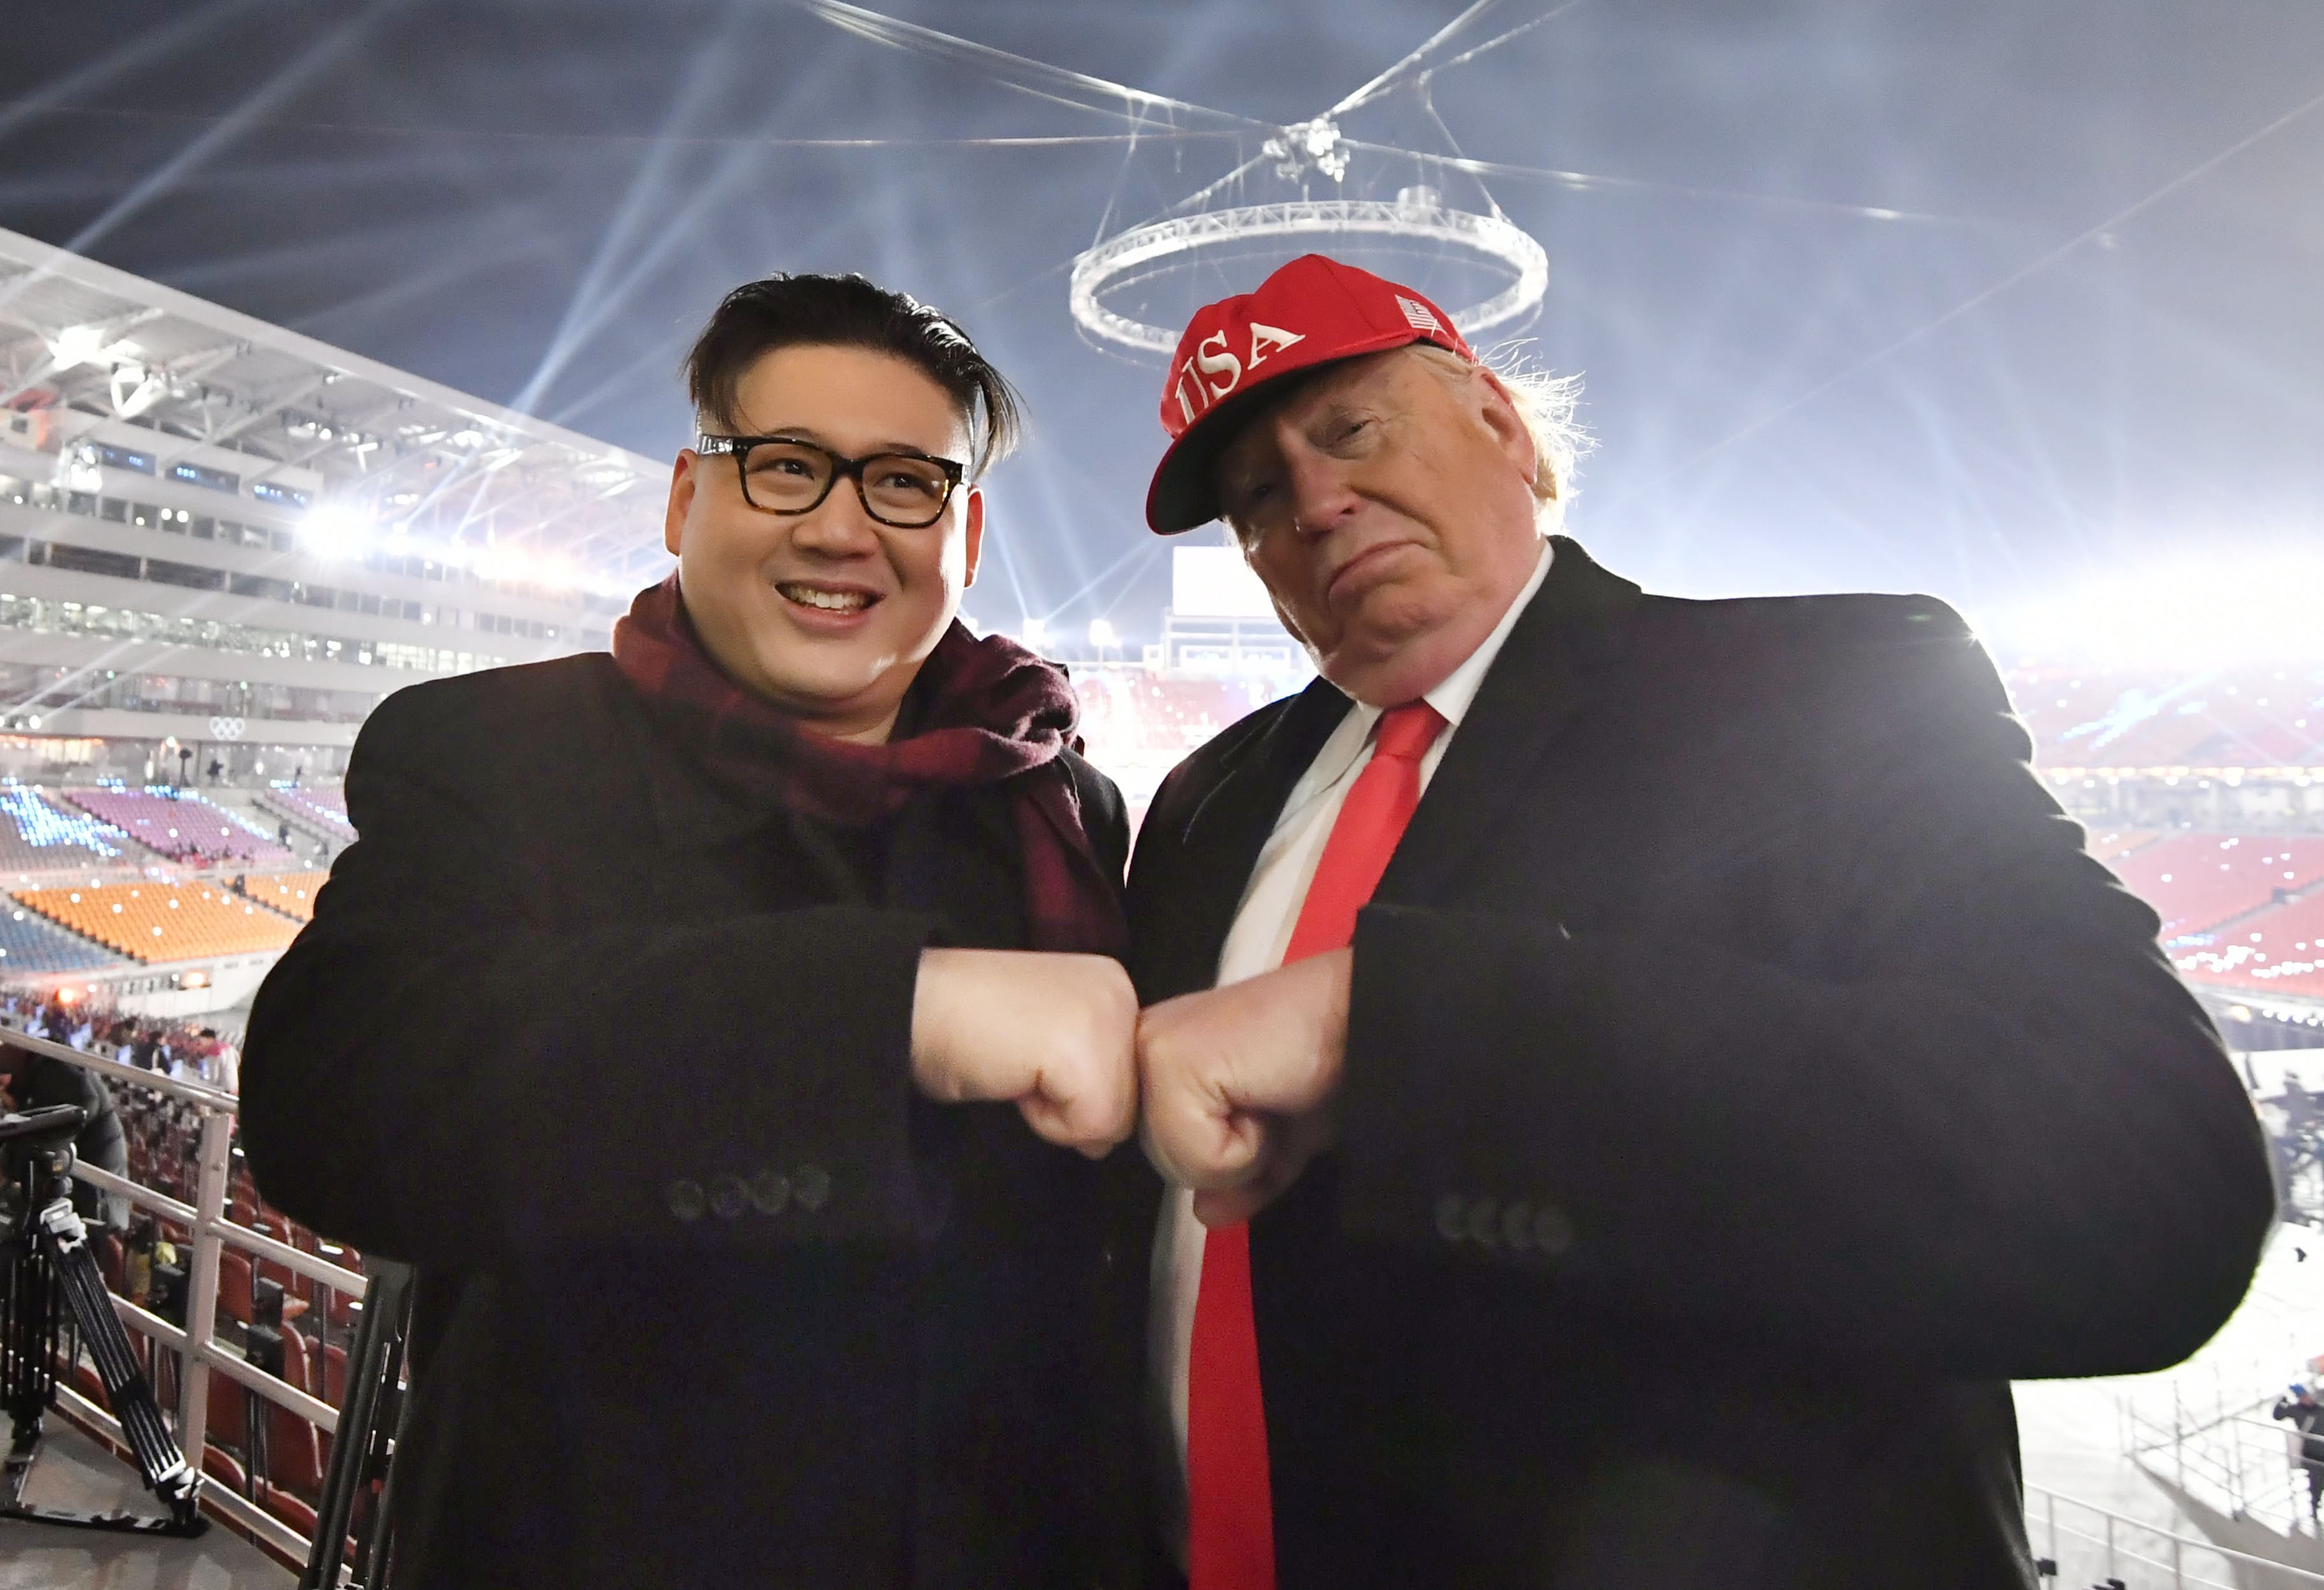 Trump spies a goal for ‘America First’, the South Korean president takes a personal stake and even Pyongyang has something to gain. But China may be less over the Moon